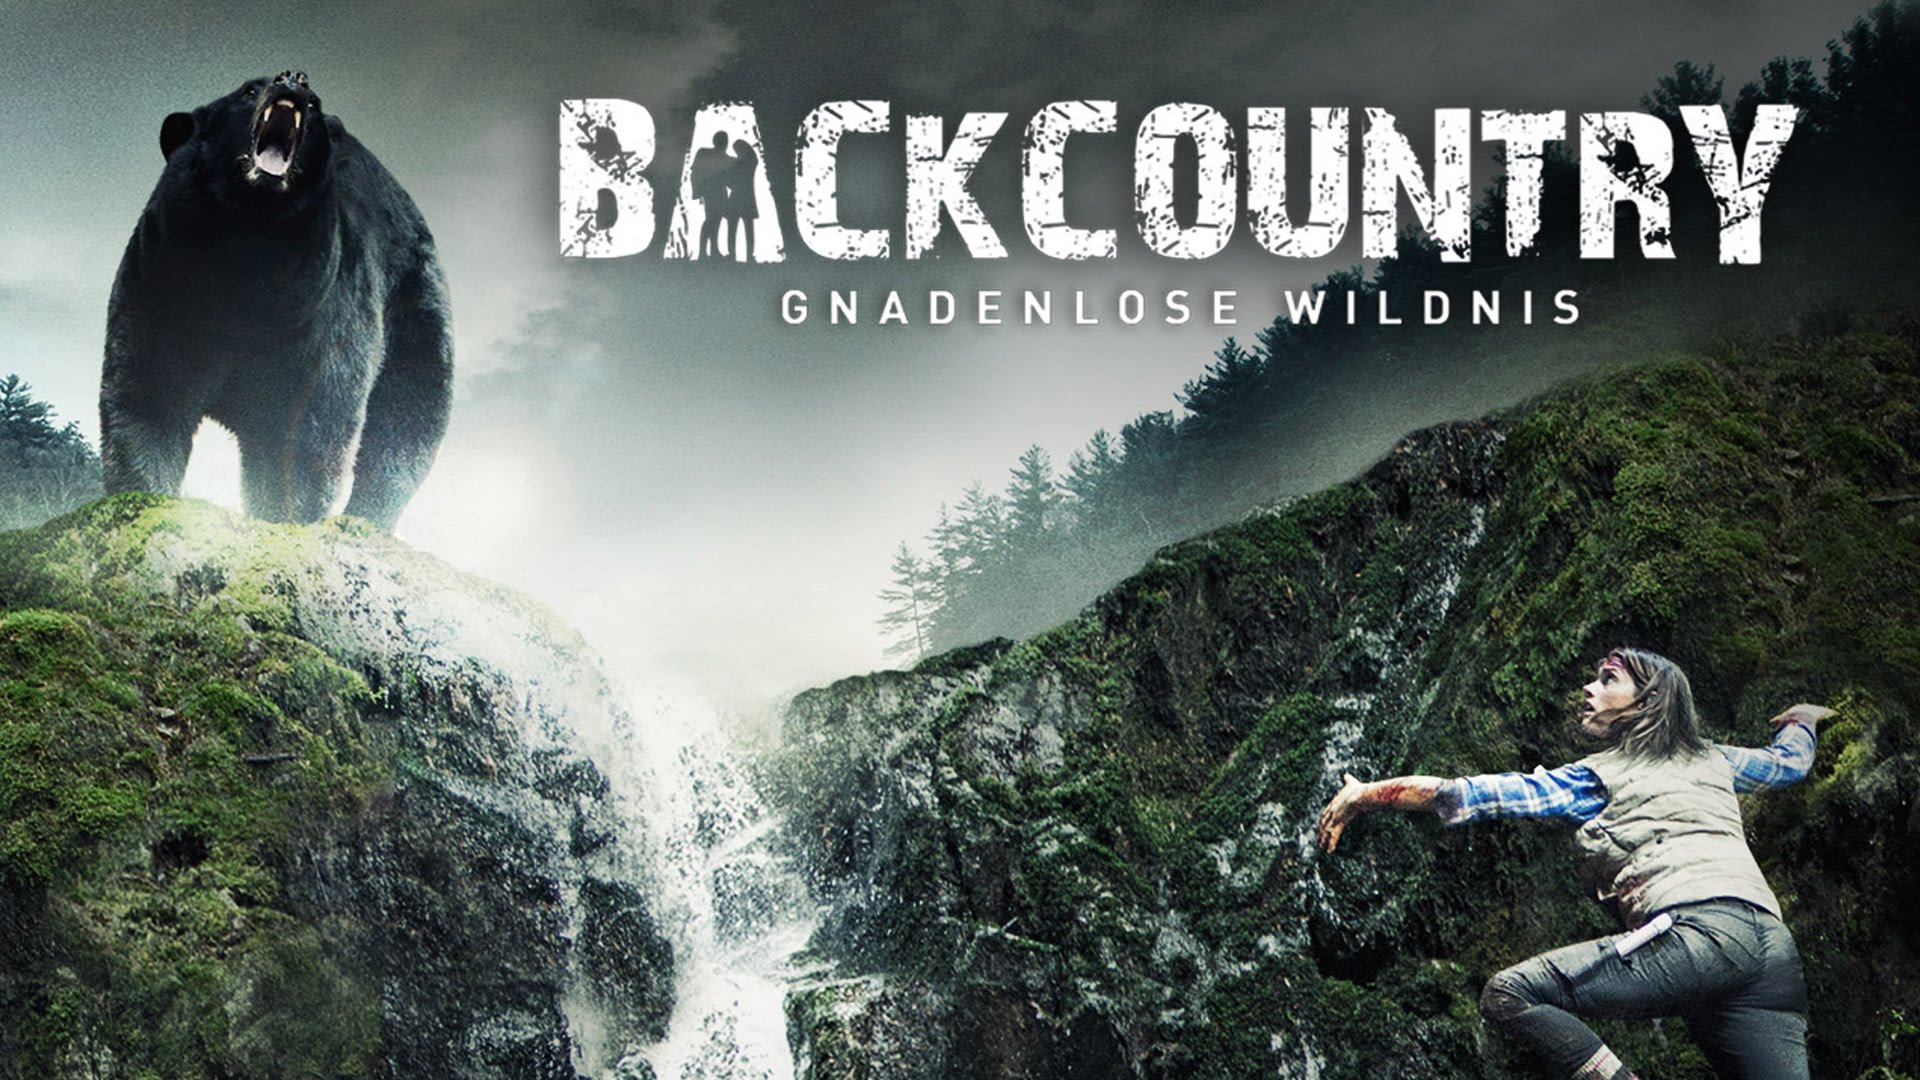 Nice Images Collection: Backcountry Desktop Wallpapers